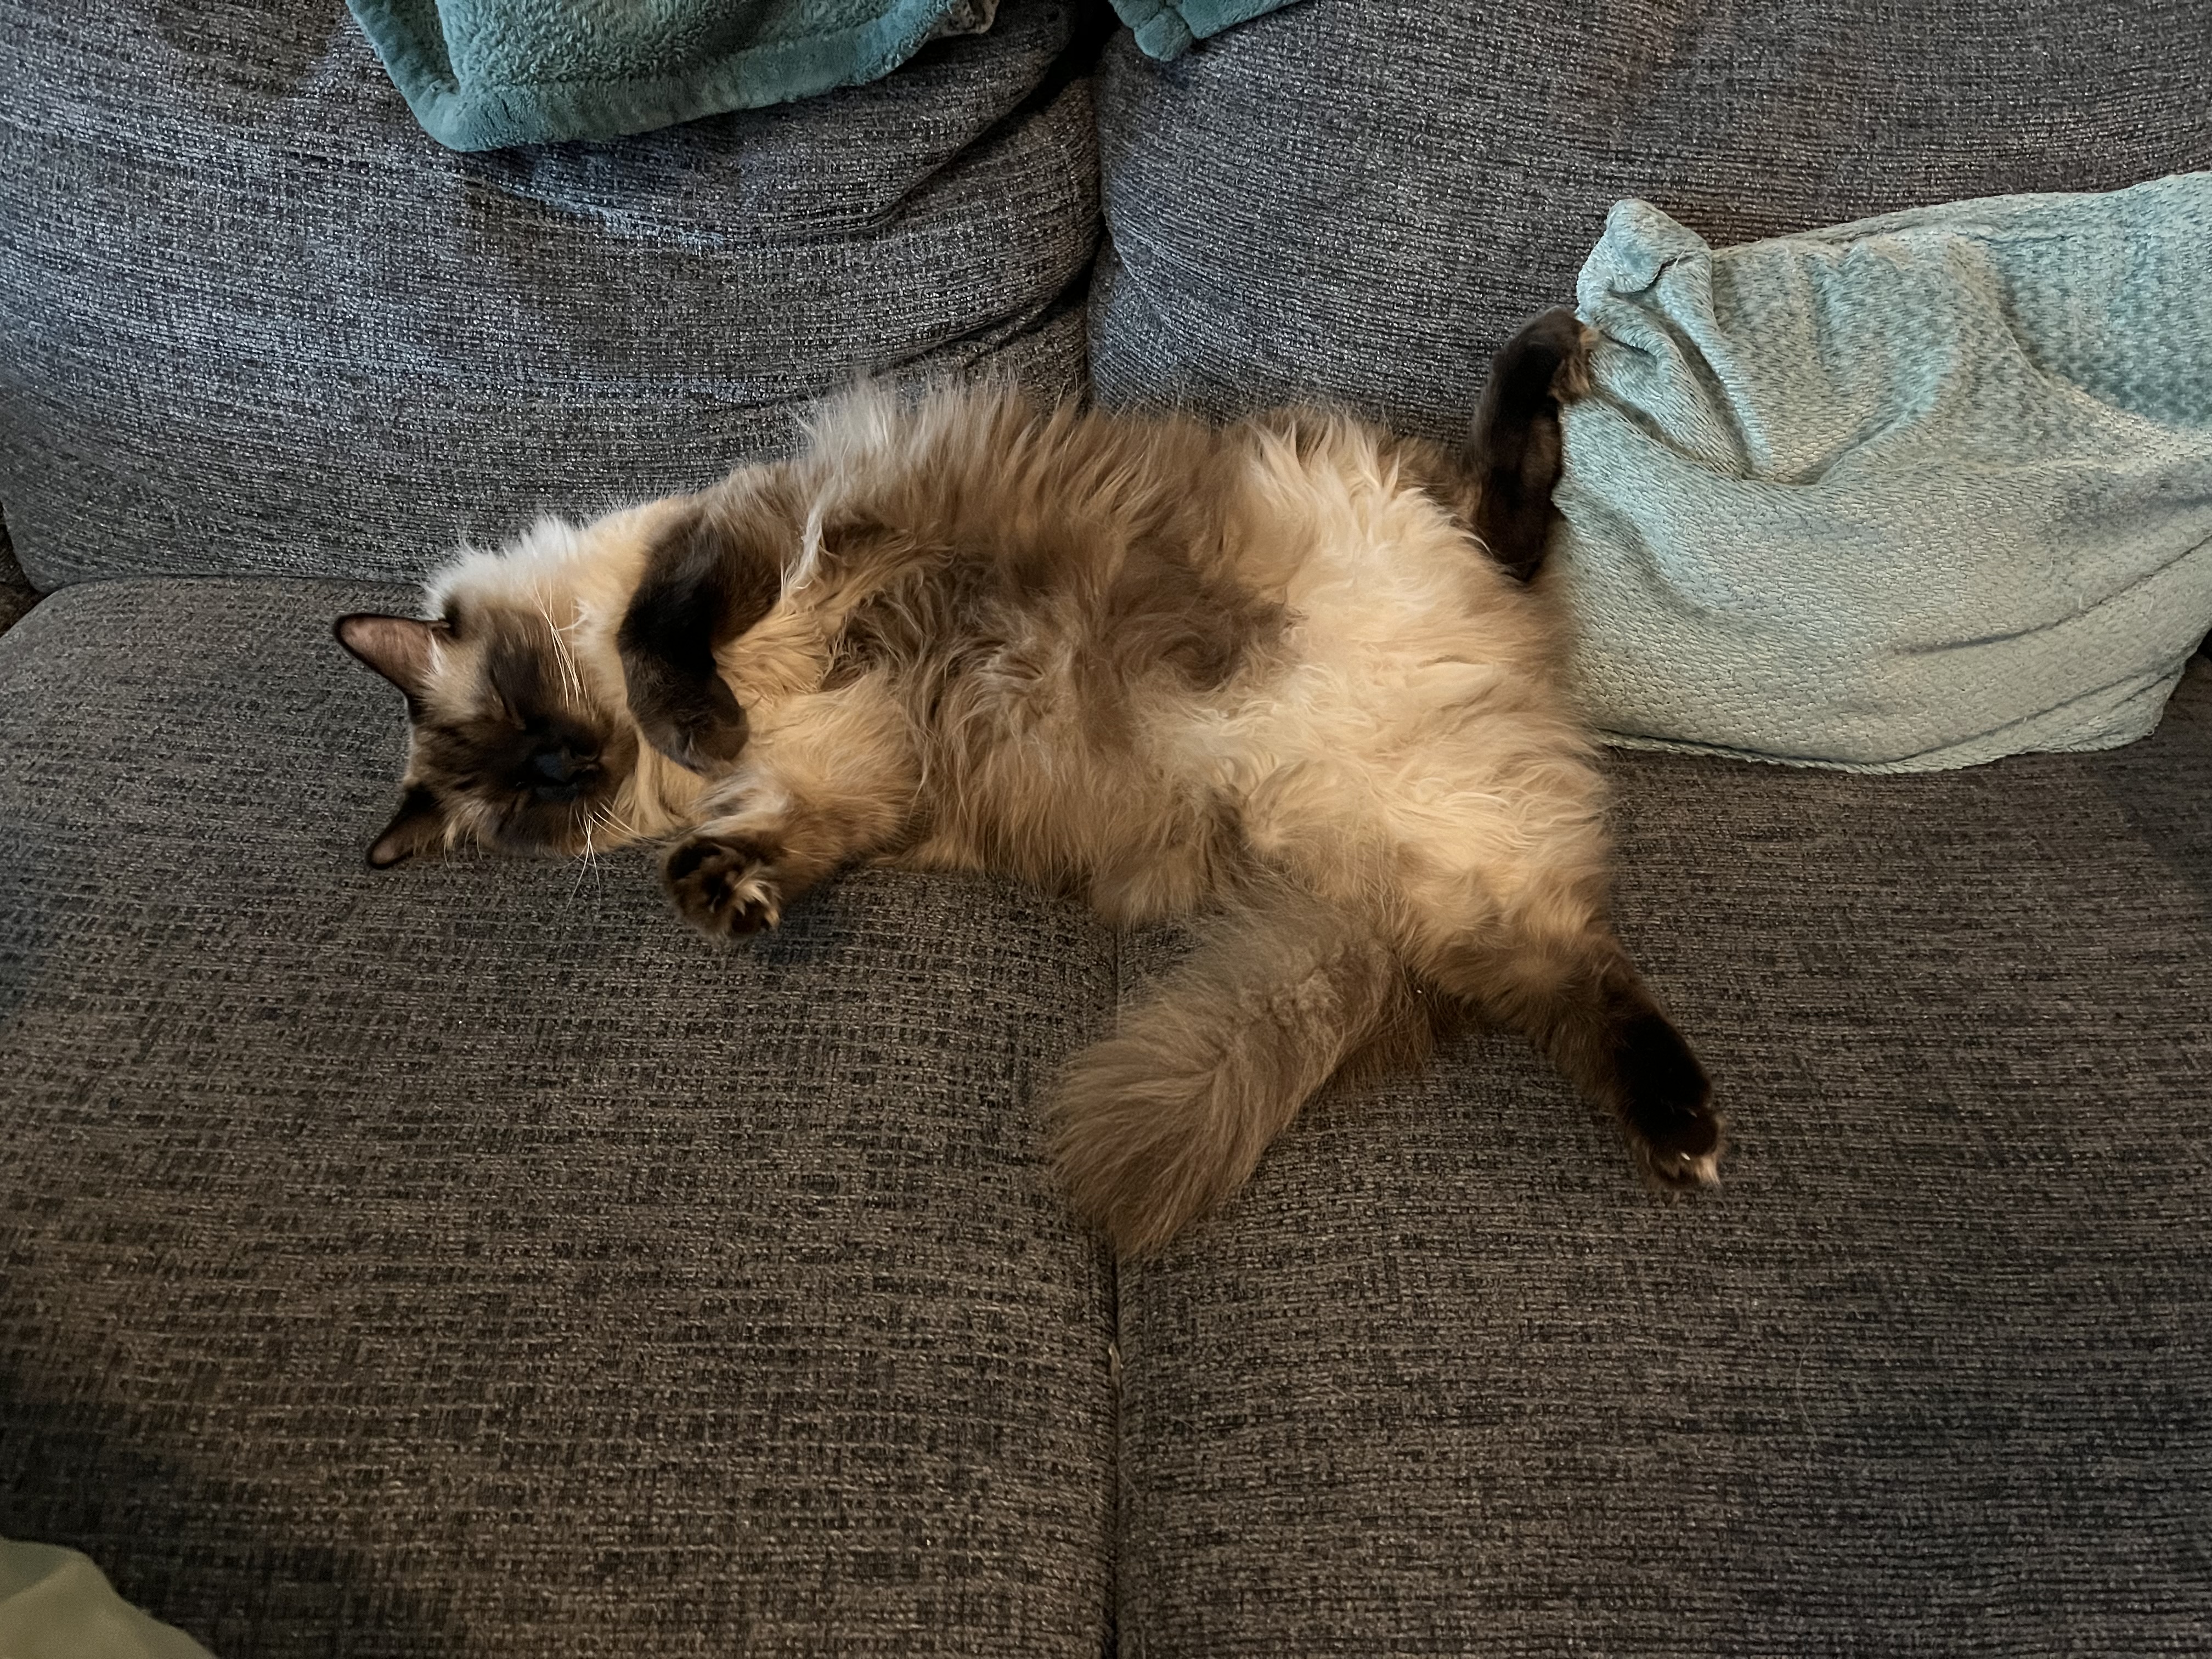 Fluffy sealpoint cat sleeping on his back with back legs apart and from paws pulled in.